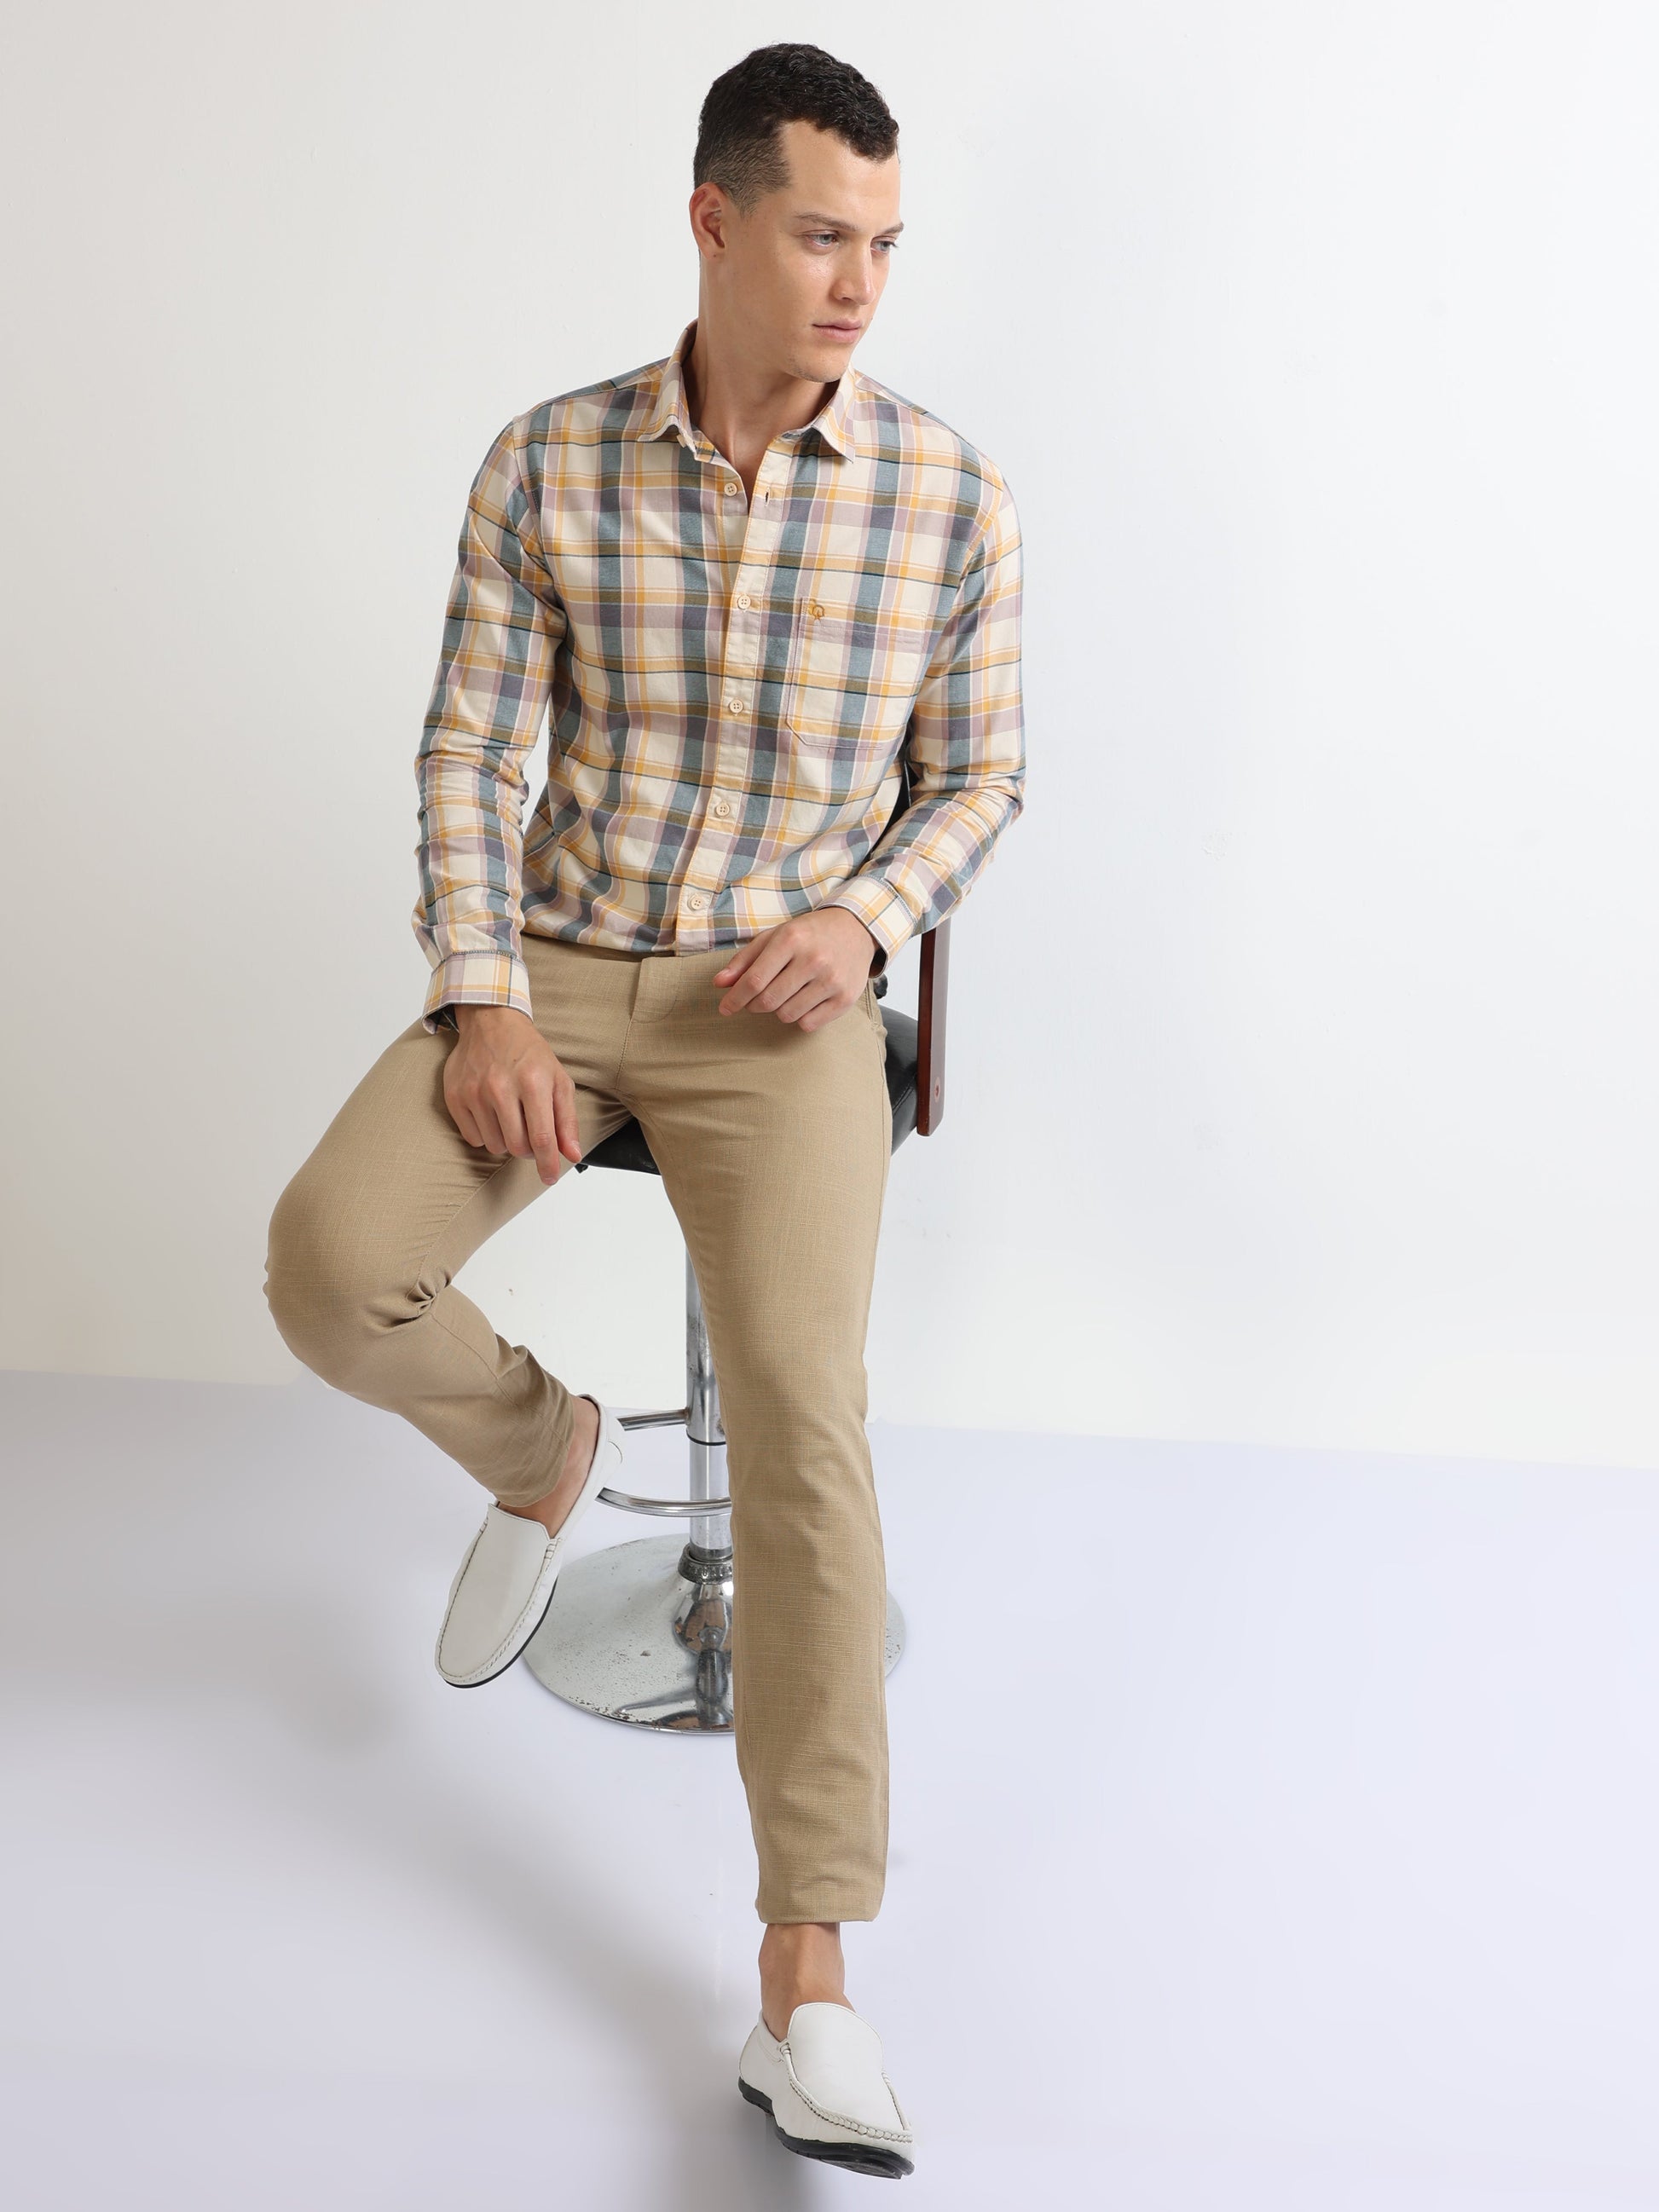 Buy Single Pocket Smart Casual Oxford Checked Shirt Online